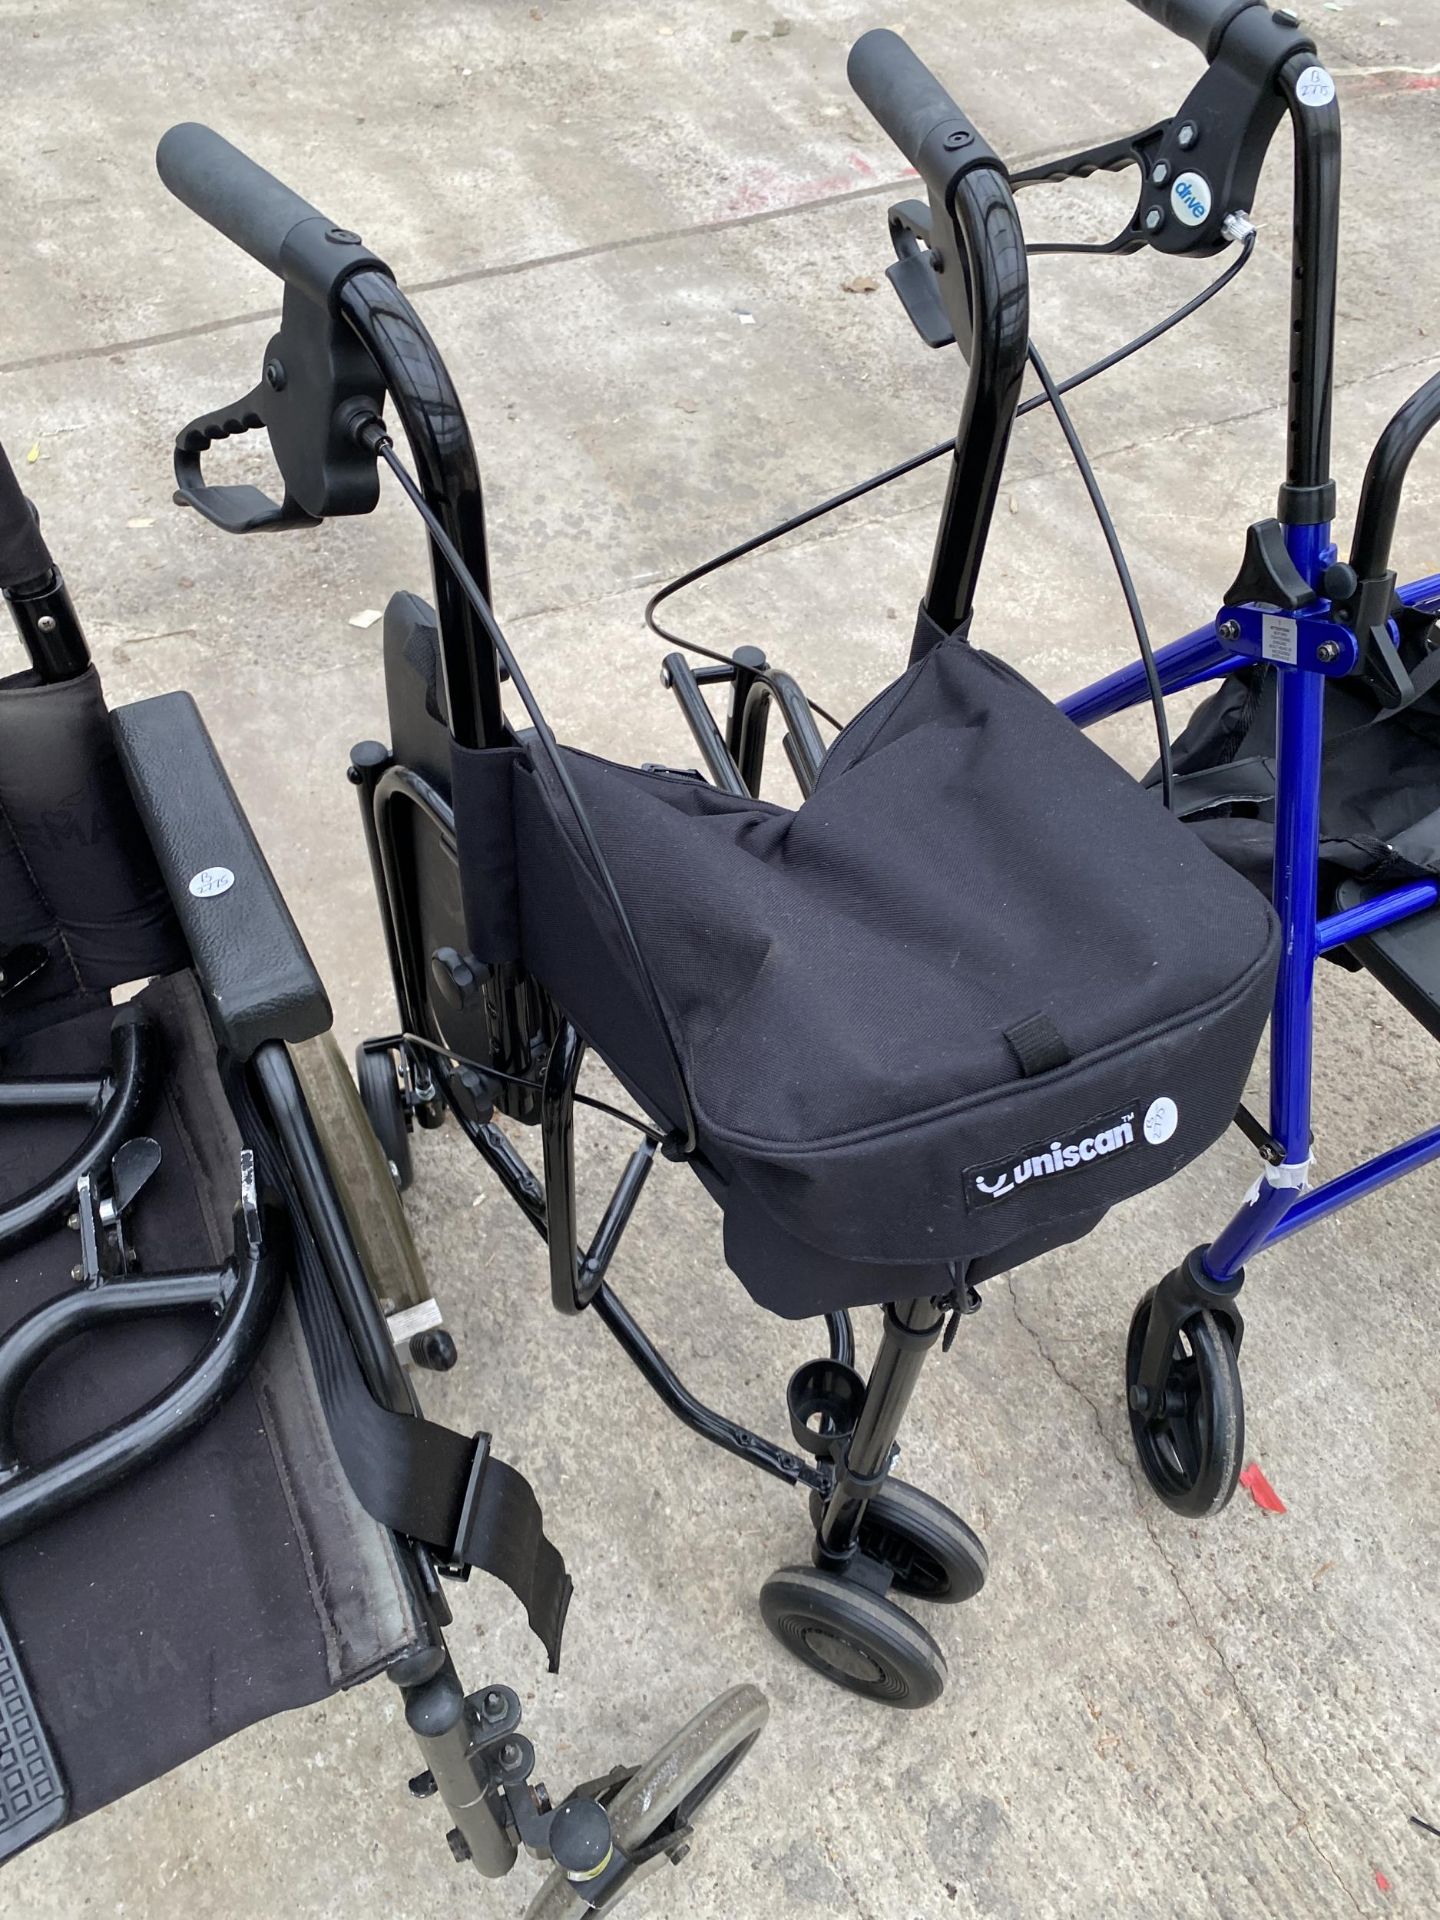 TWO MOBILITY AIDS AND A WHEEL CHAIR - Bild 4 aus 6